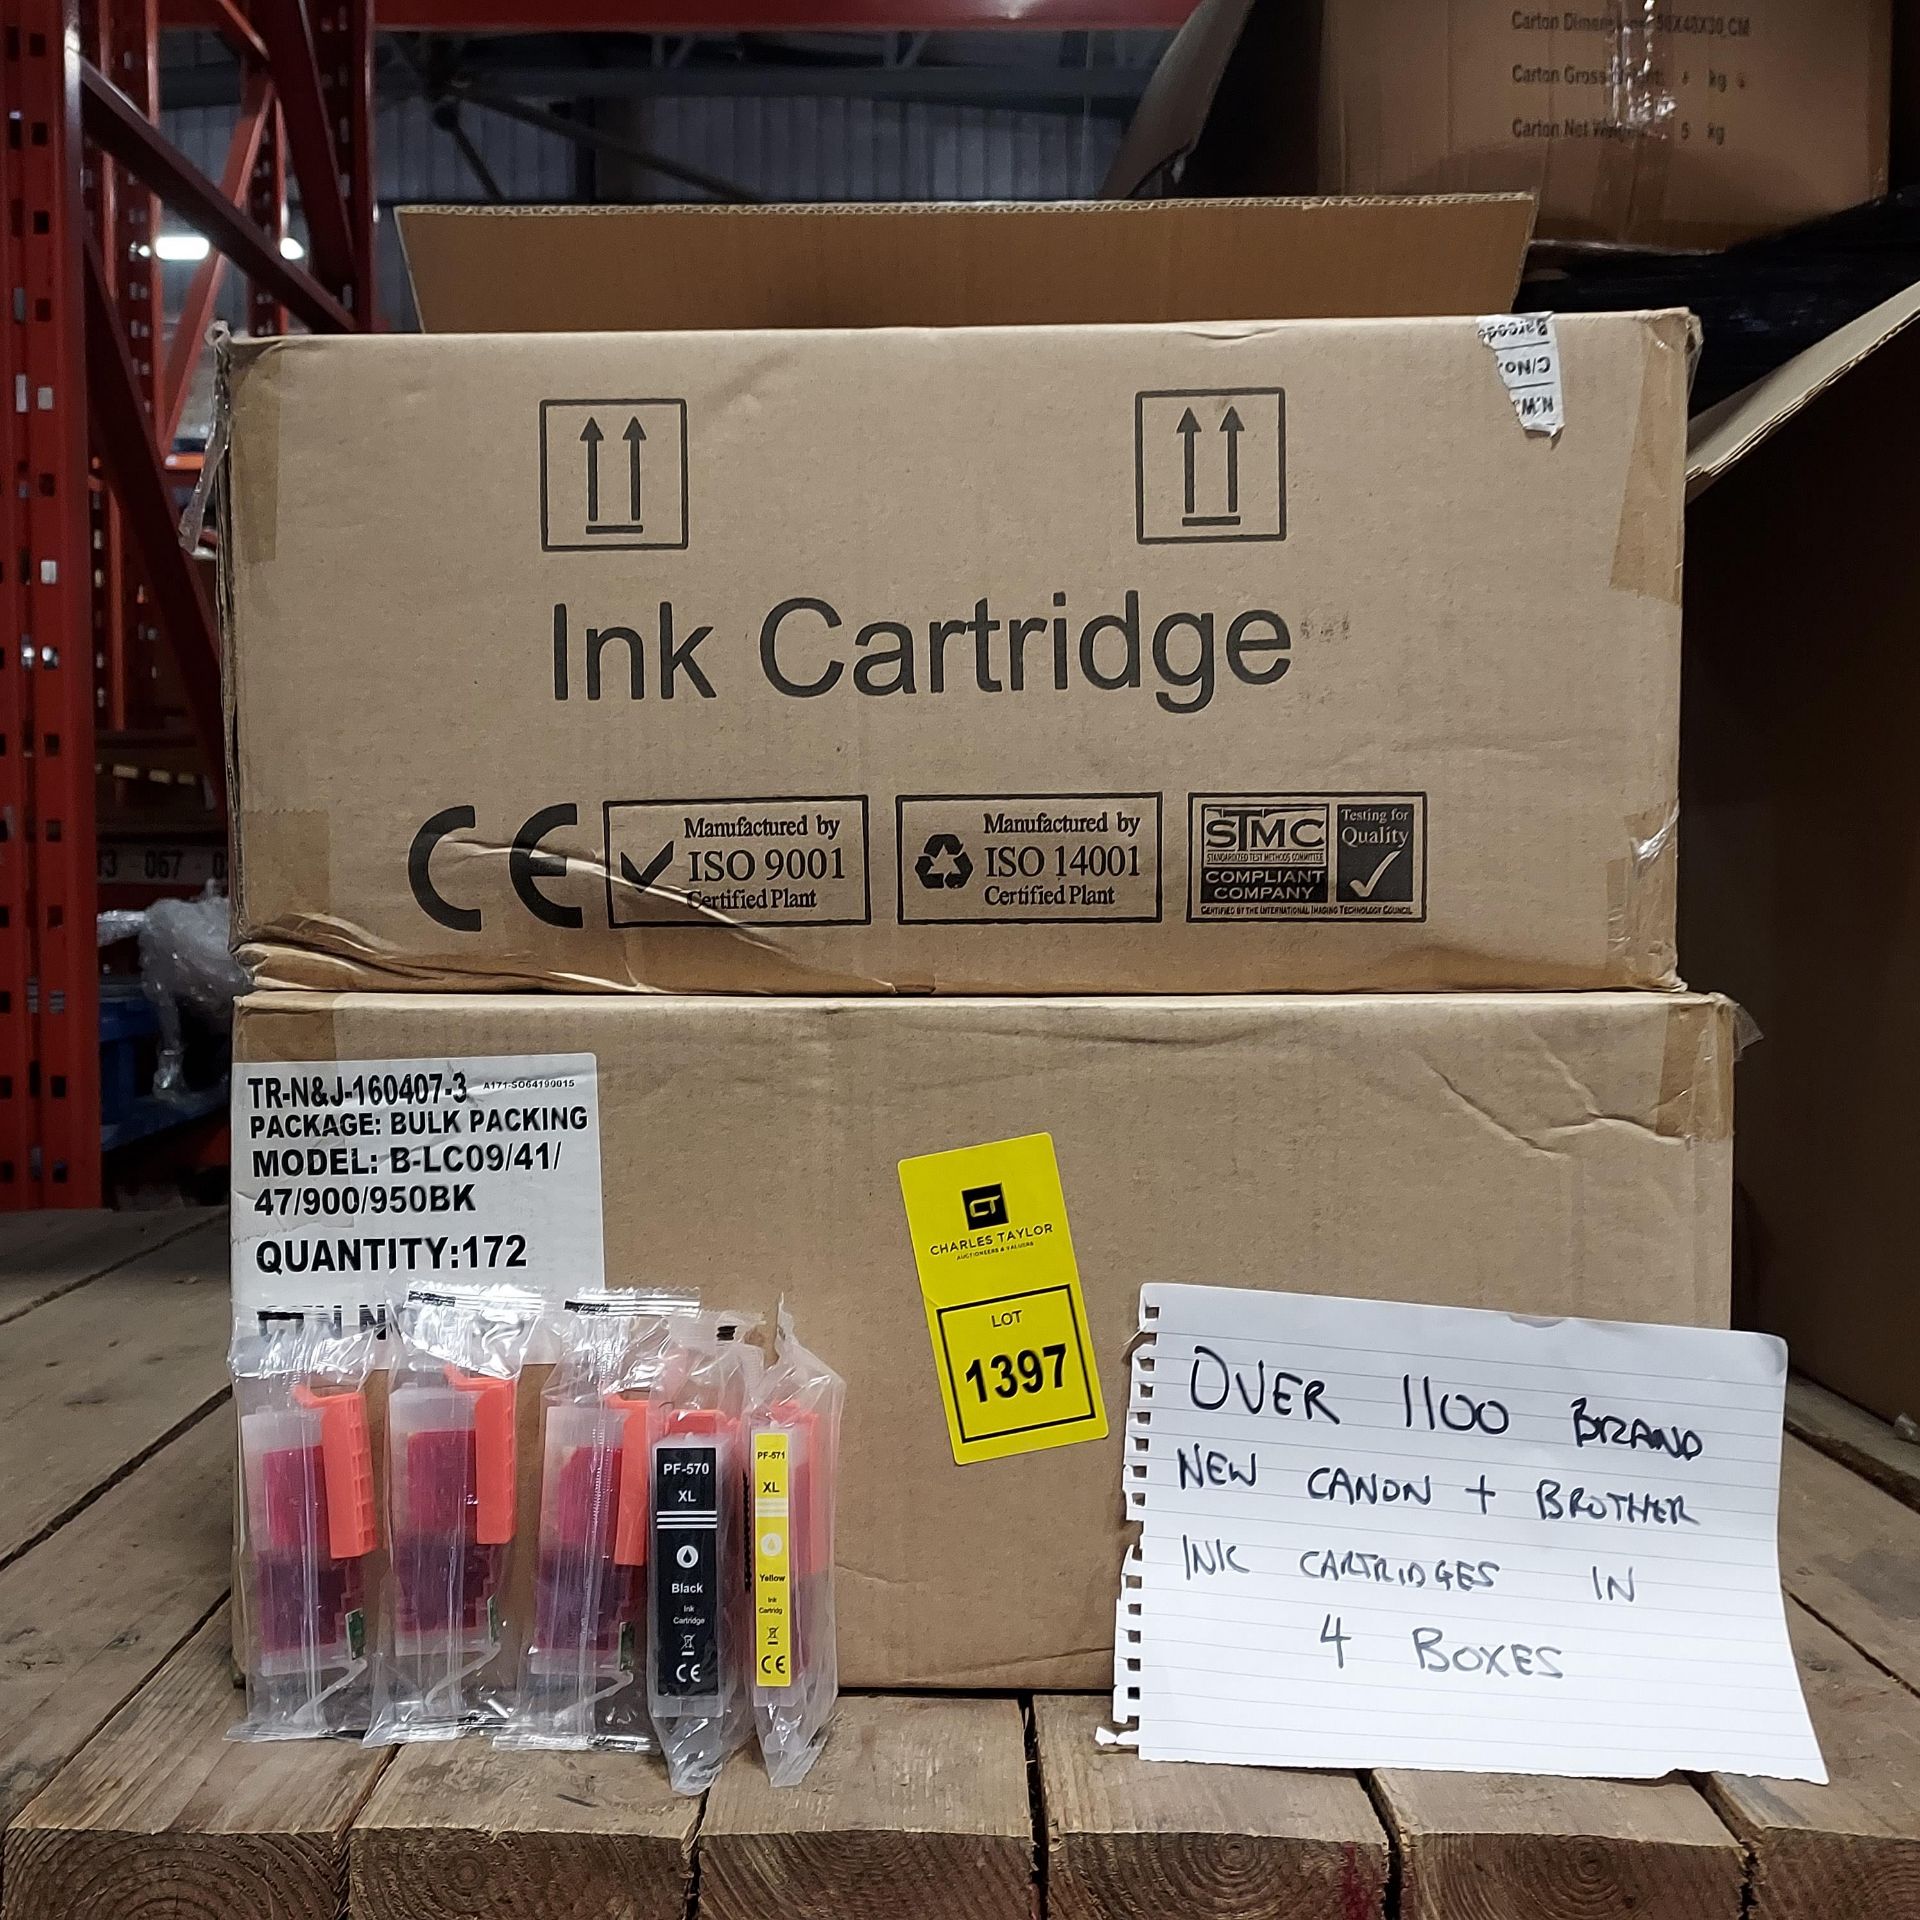 OVER 1100 BRAND NEW CANON AND BROTHER INK CARTRIDGES TO INCLUDE MODELS ( PF -1632 ) (PF-570XLBK) (